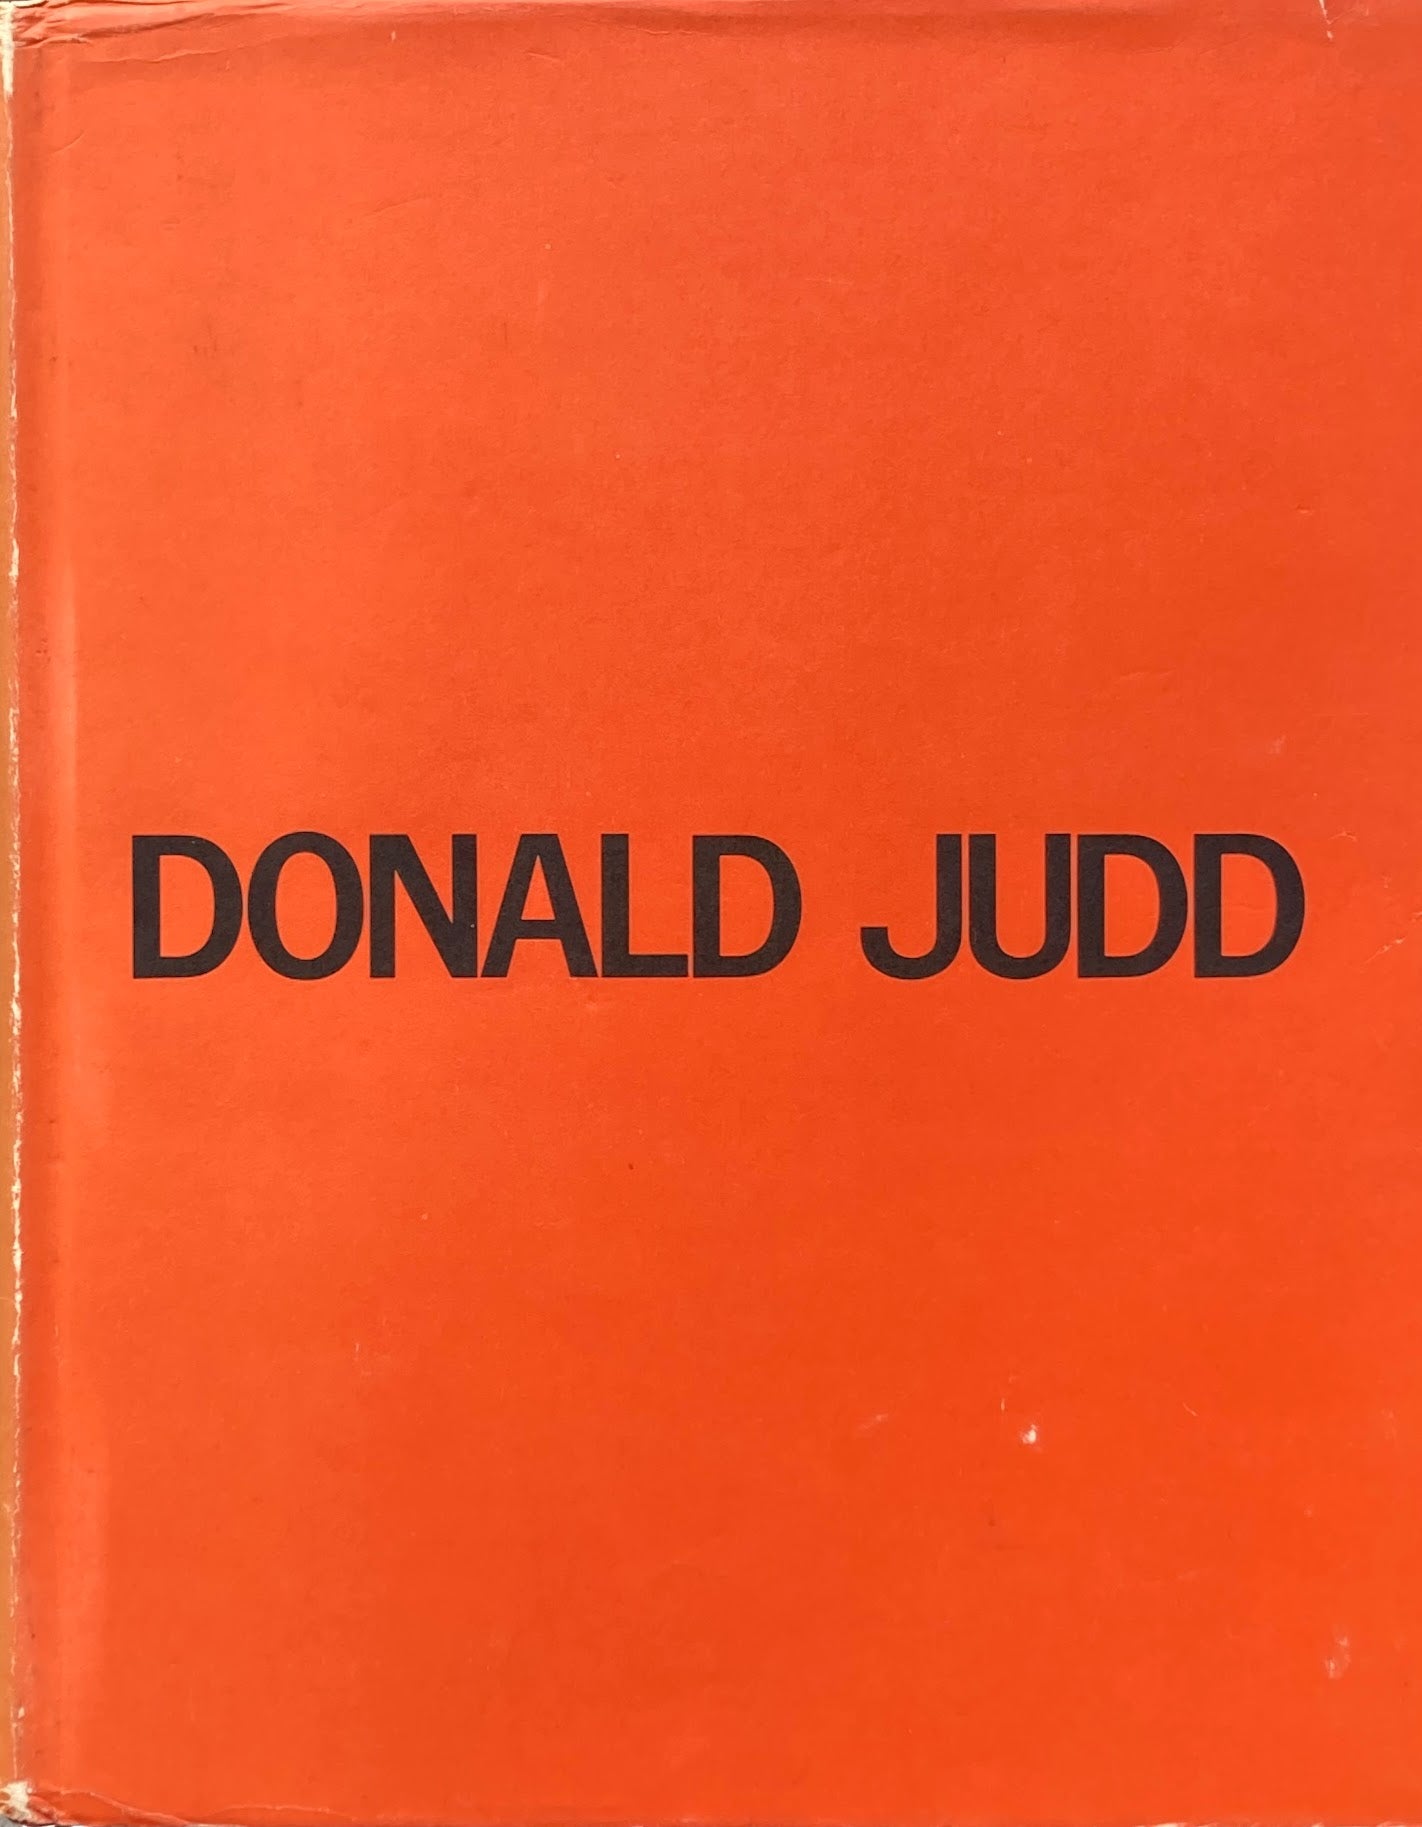 Donald Judd A catalogue of the exhibition at the National Gallery 